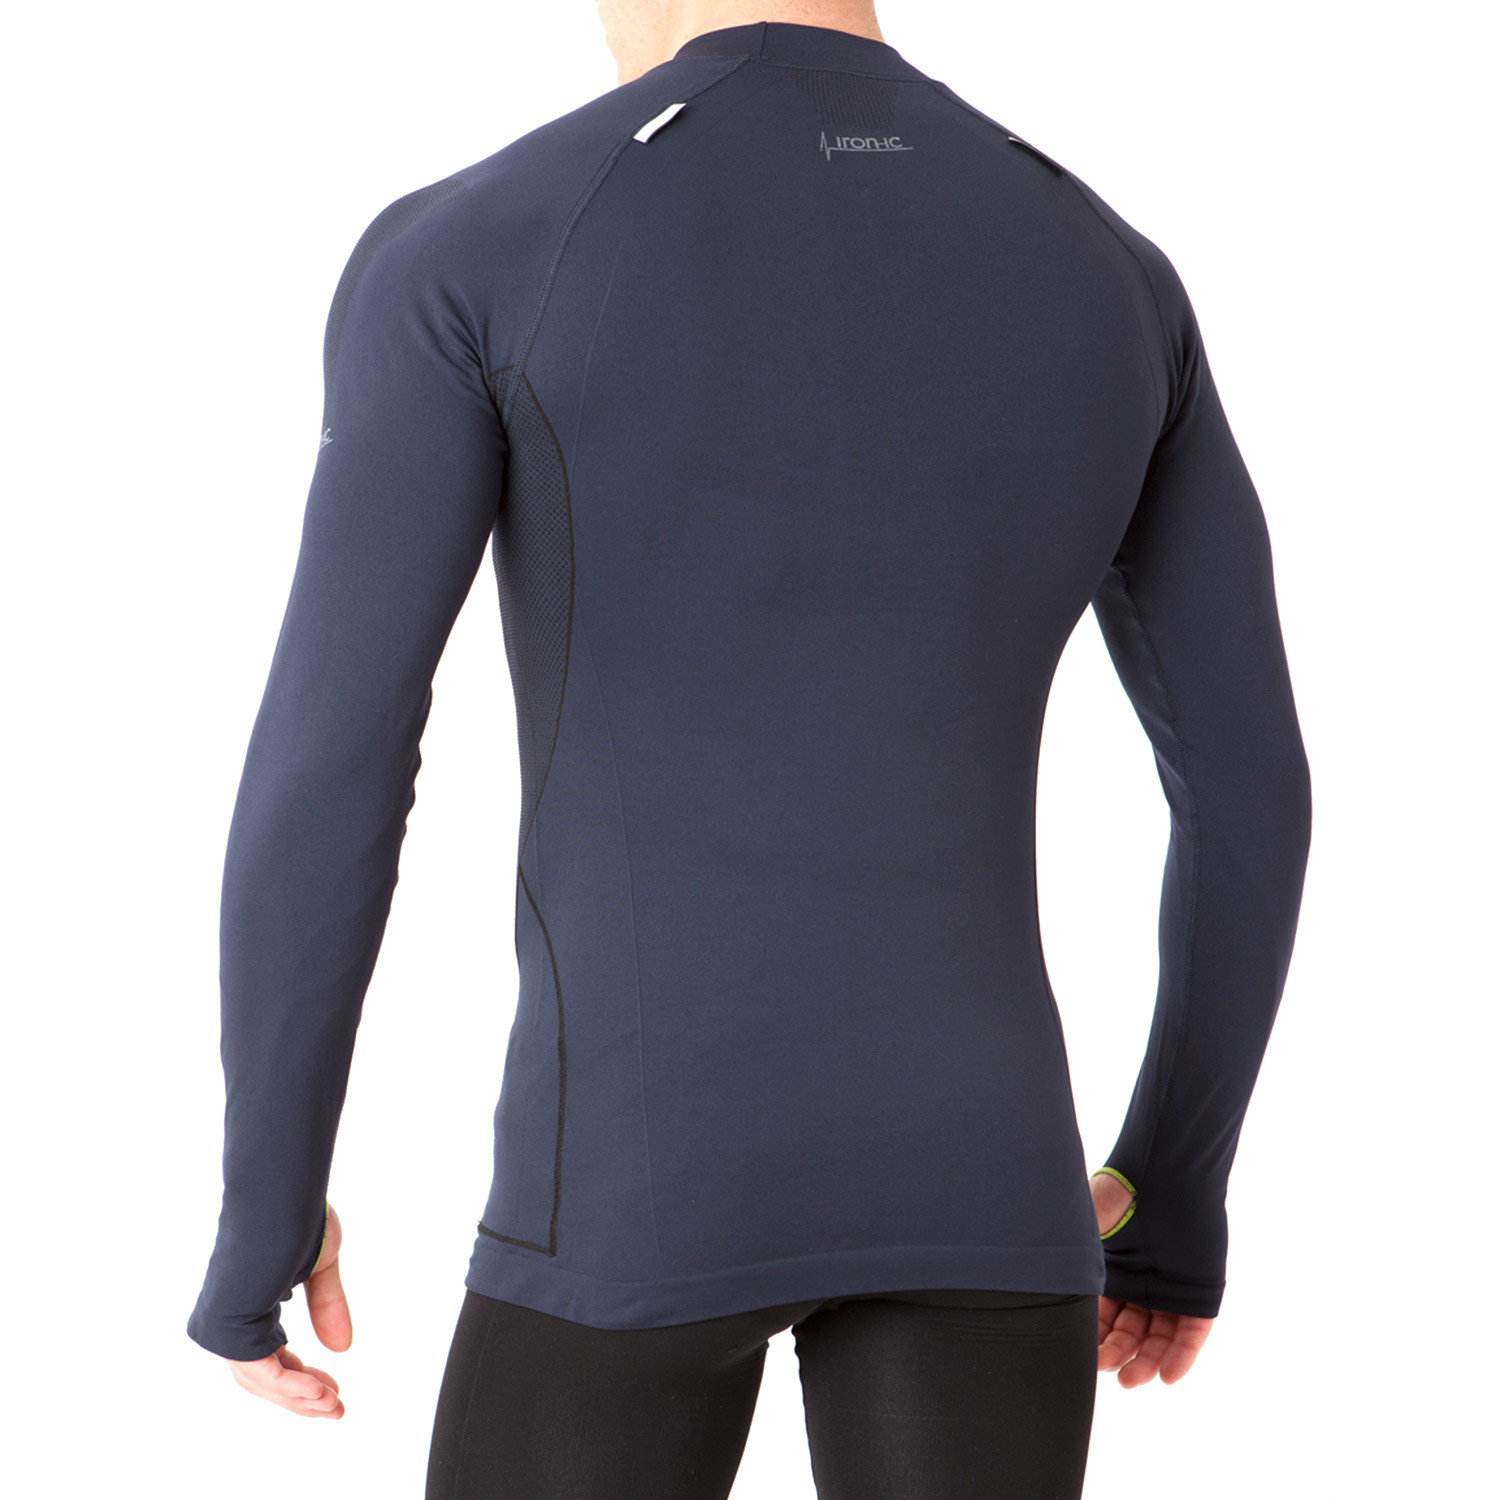 Iron-ic // Thumb Hole Athletic Shirt // Blue (S) - Advanced Athletic Apparel - Touch of Modern